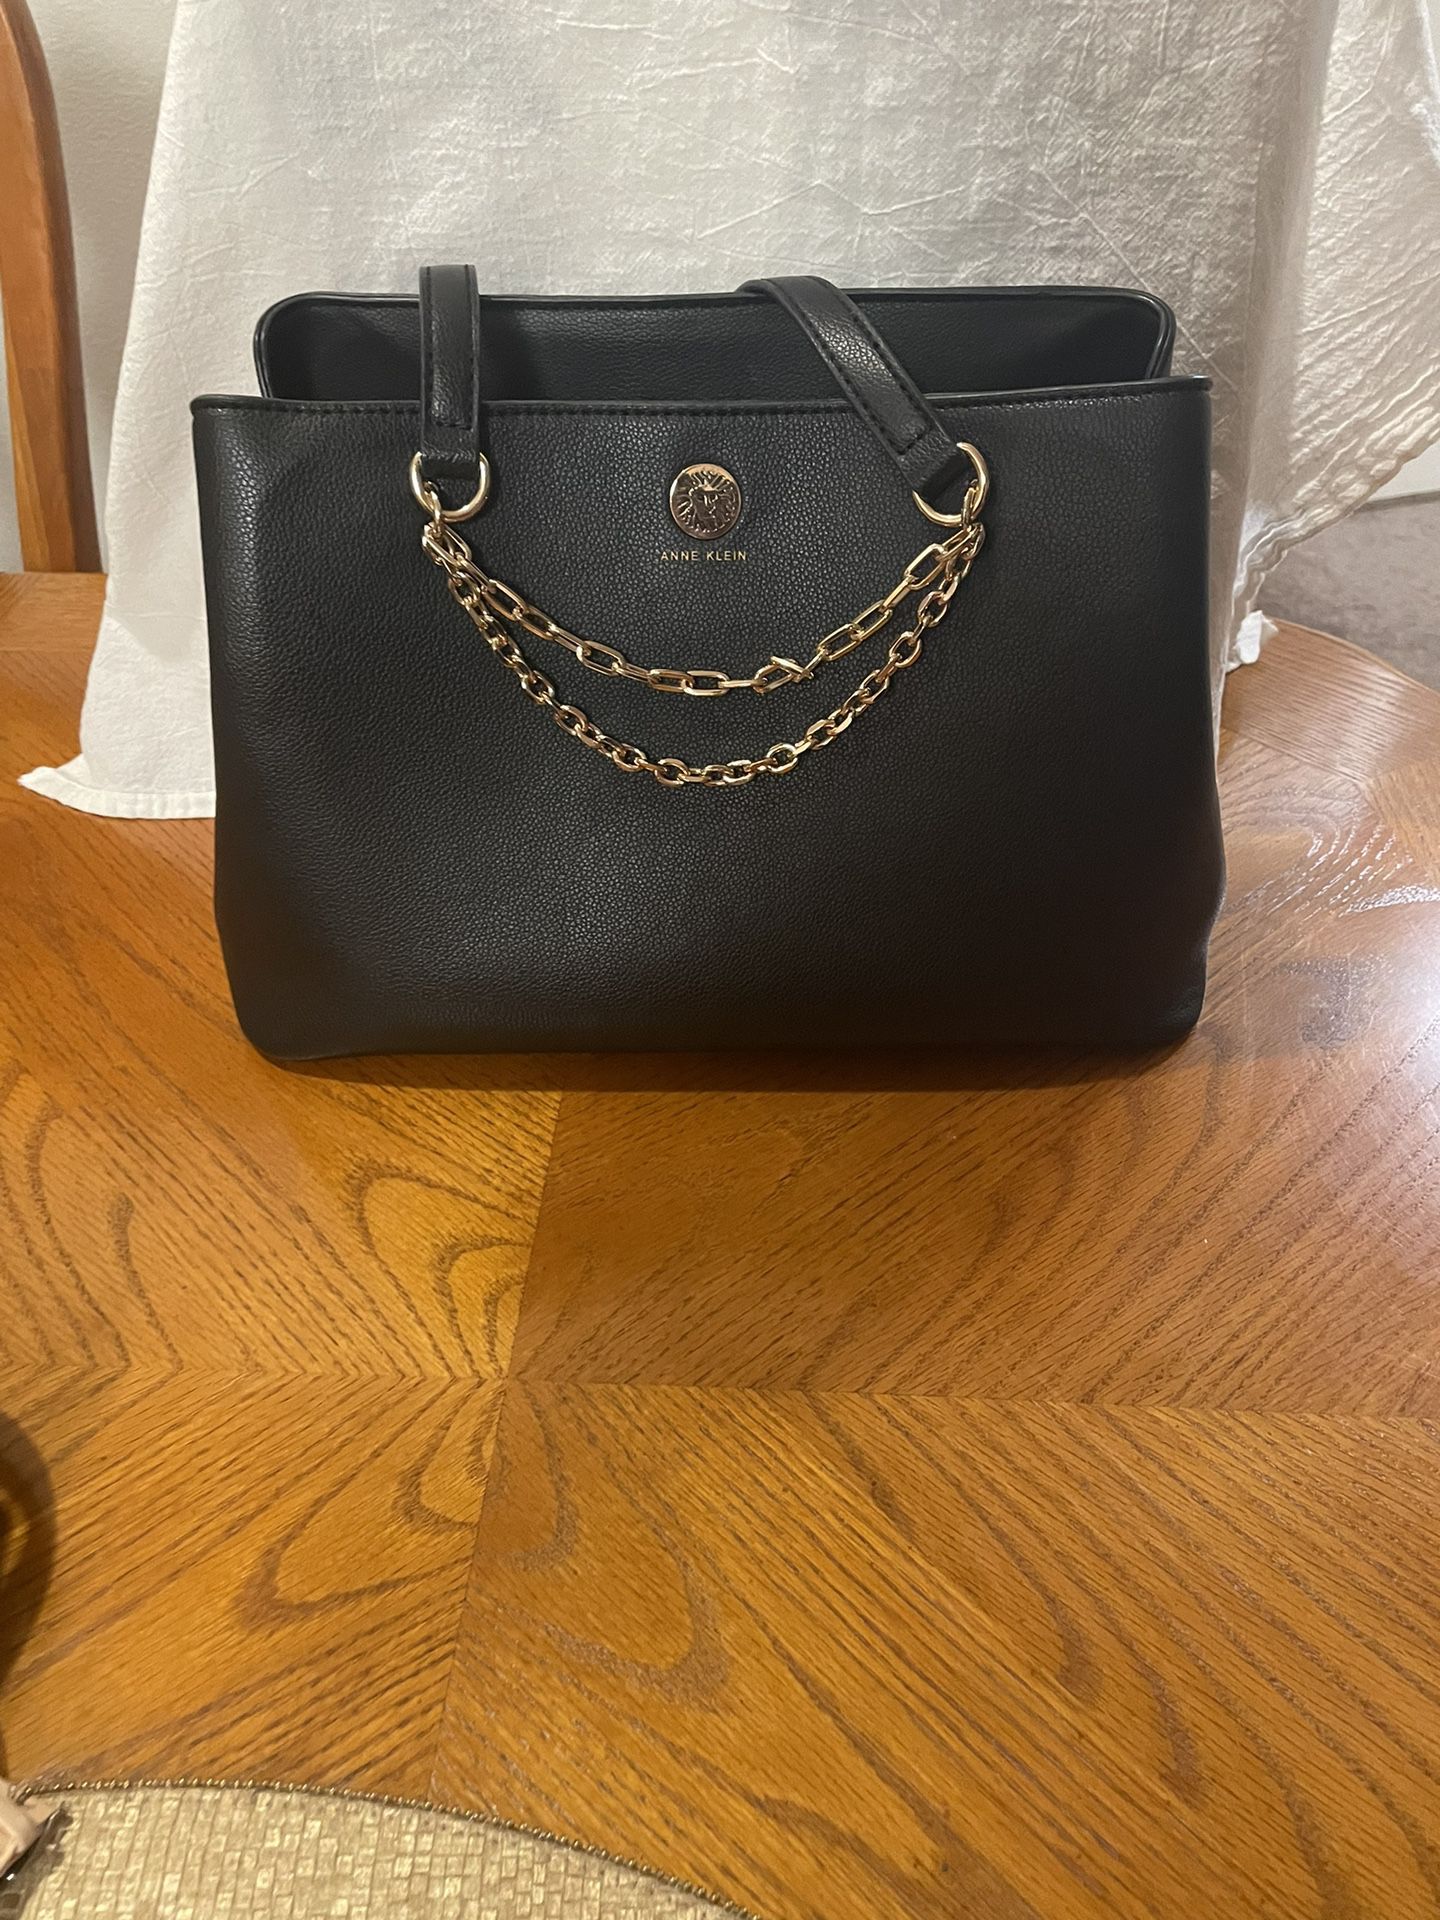 Beautiful Black And Gold Anne Klein Hand Bag